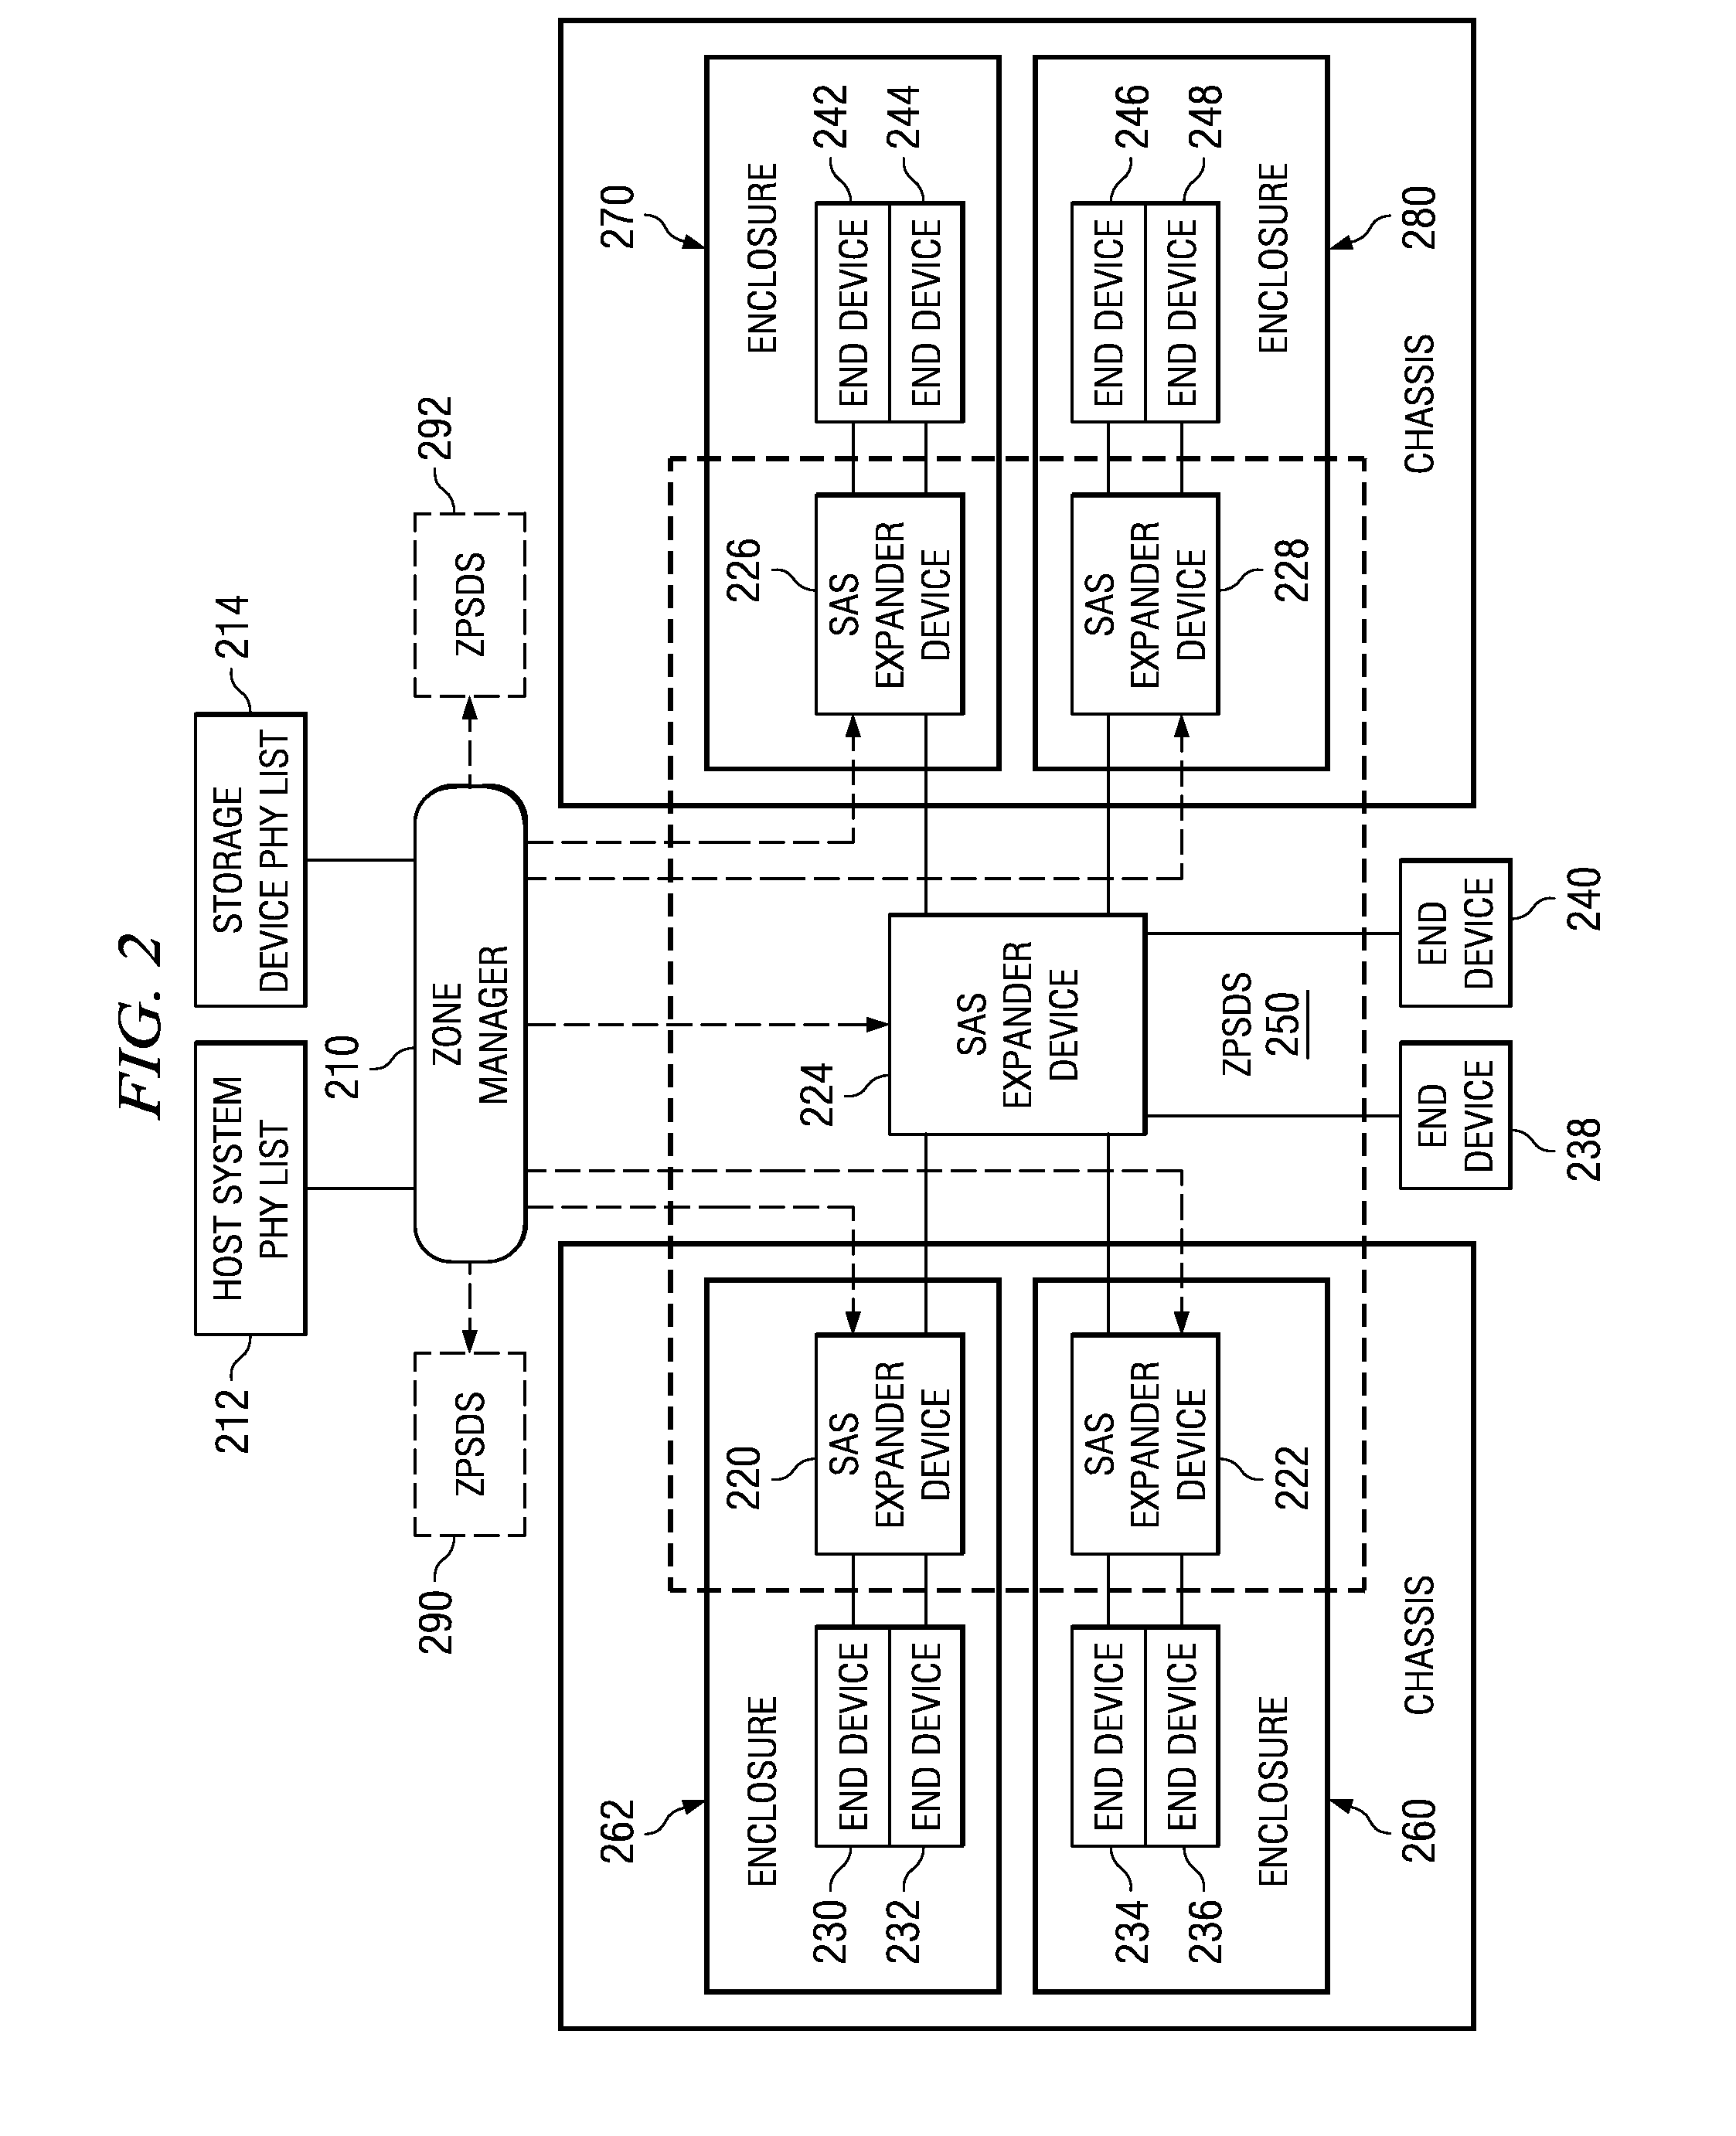 System and Method for Zoning of Devices in a Storage Area Network